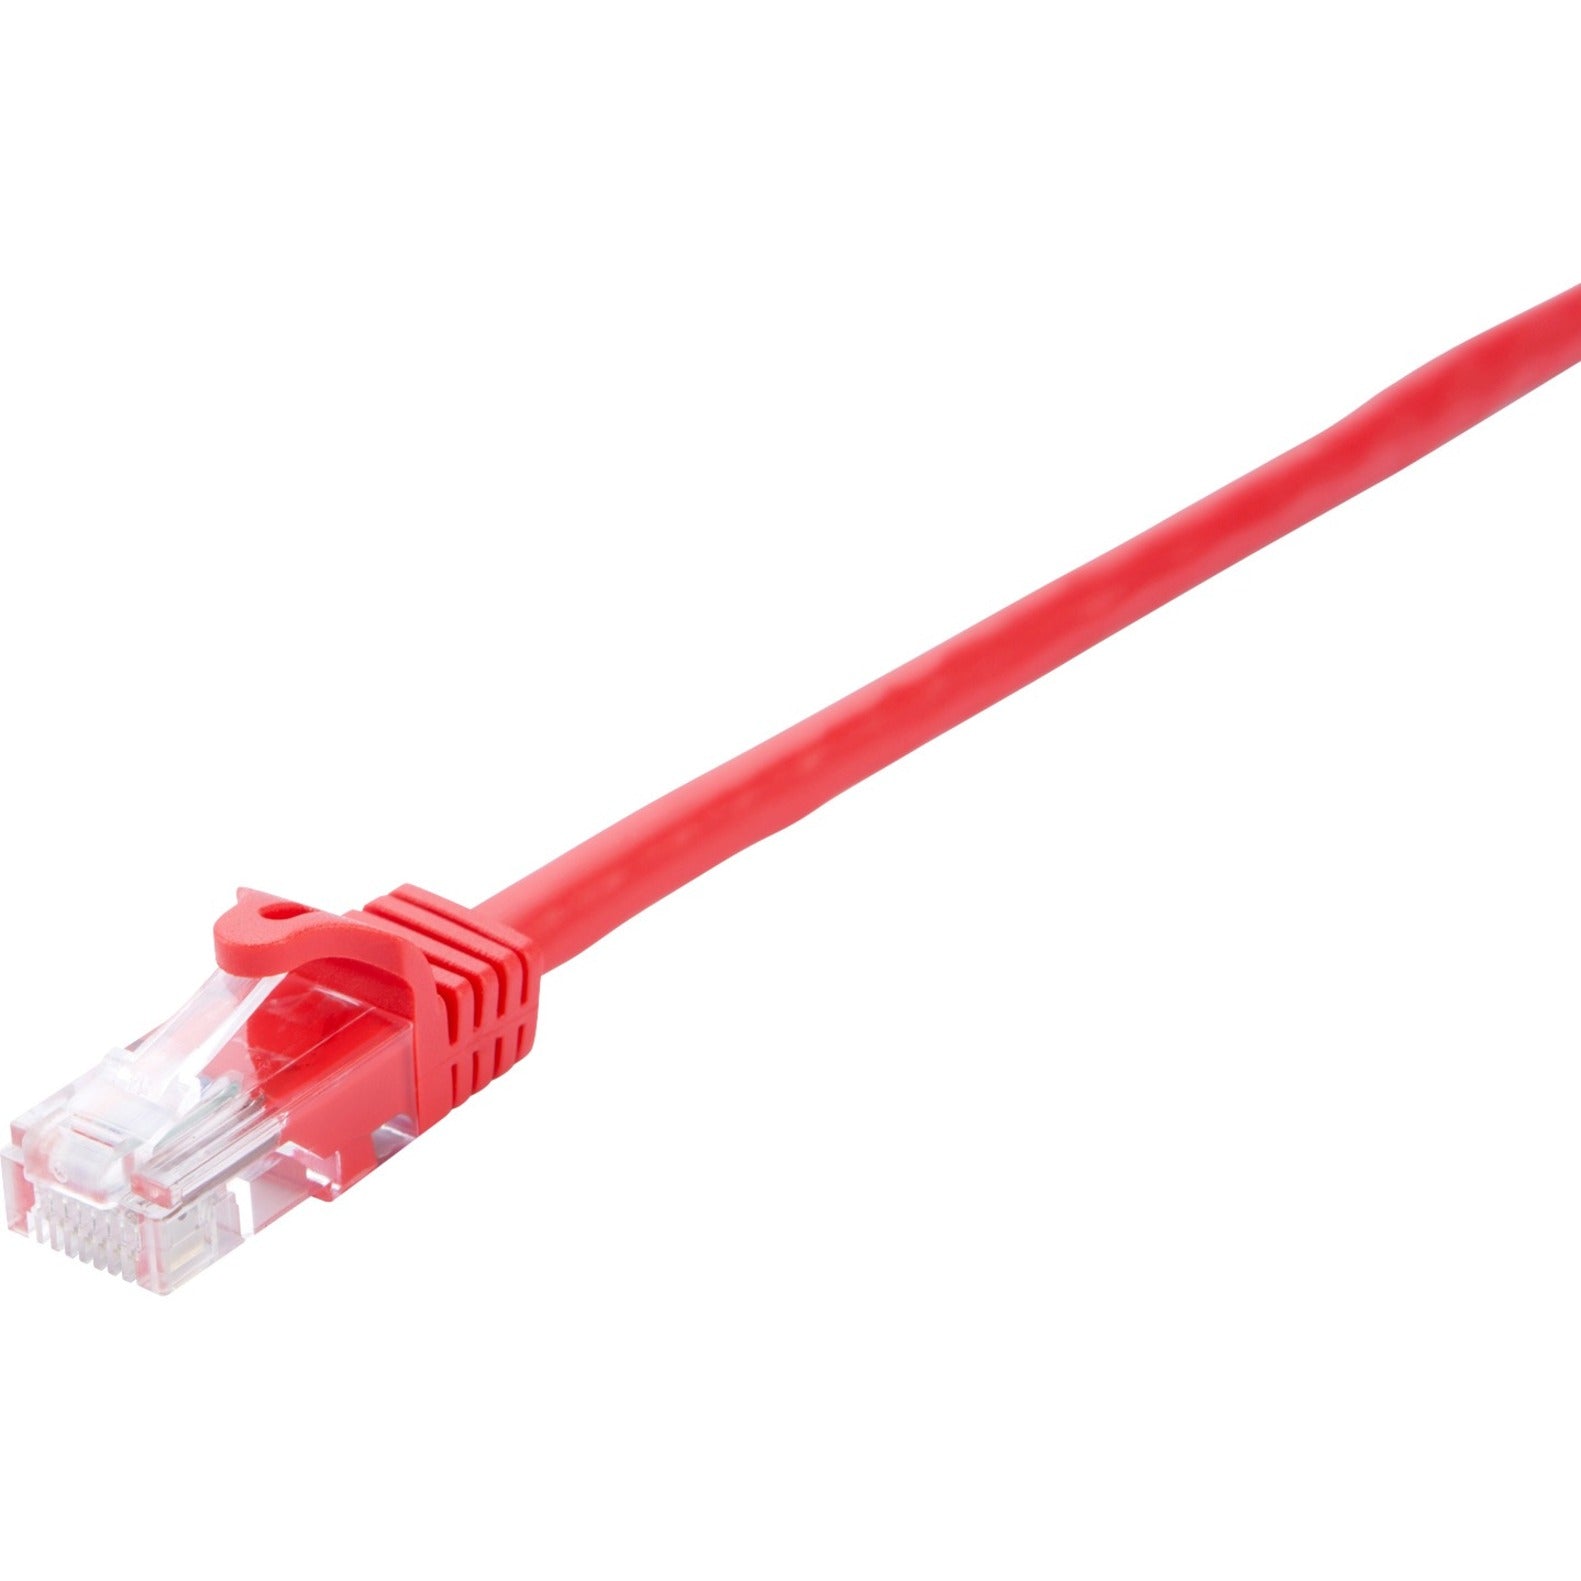 V7 V7CAT5UTP-02M-RED-1N Red Cat5e Unshielded (UTP) Cable RJ45 Male to RJ45 Male 2m 6.6ft, Molded, Snagless, Noise Reducing, Strain Relief, Gold Plated Connectors